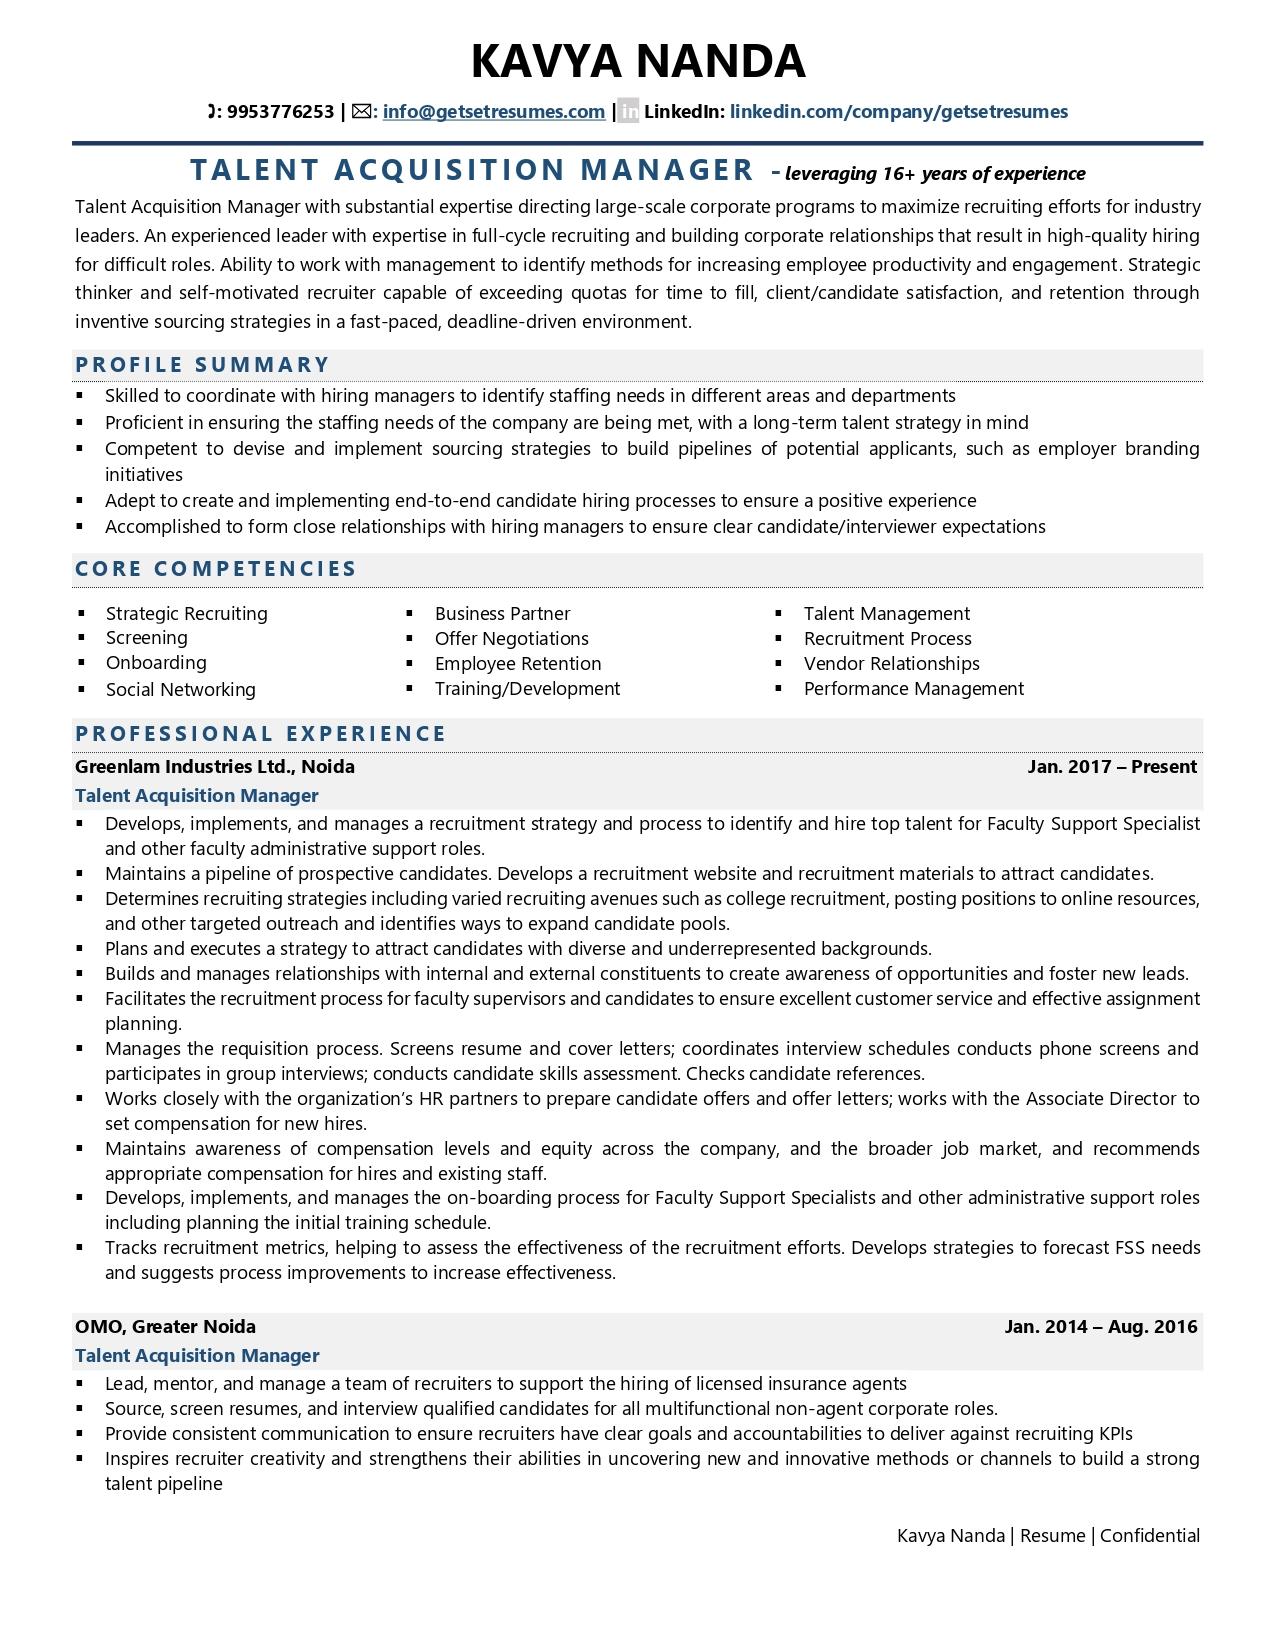 Talent Acquisition Manager Resume Examples & Template (with job winning